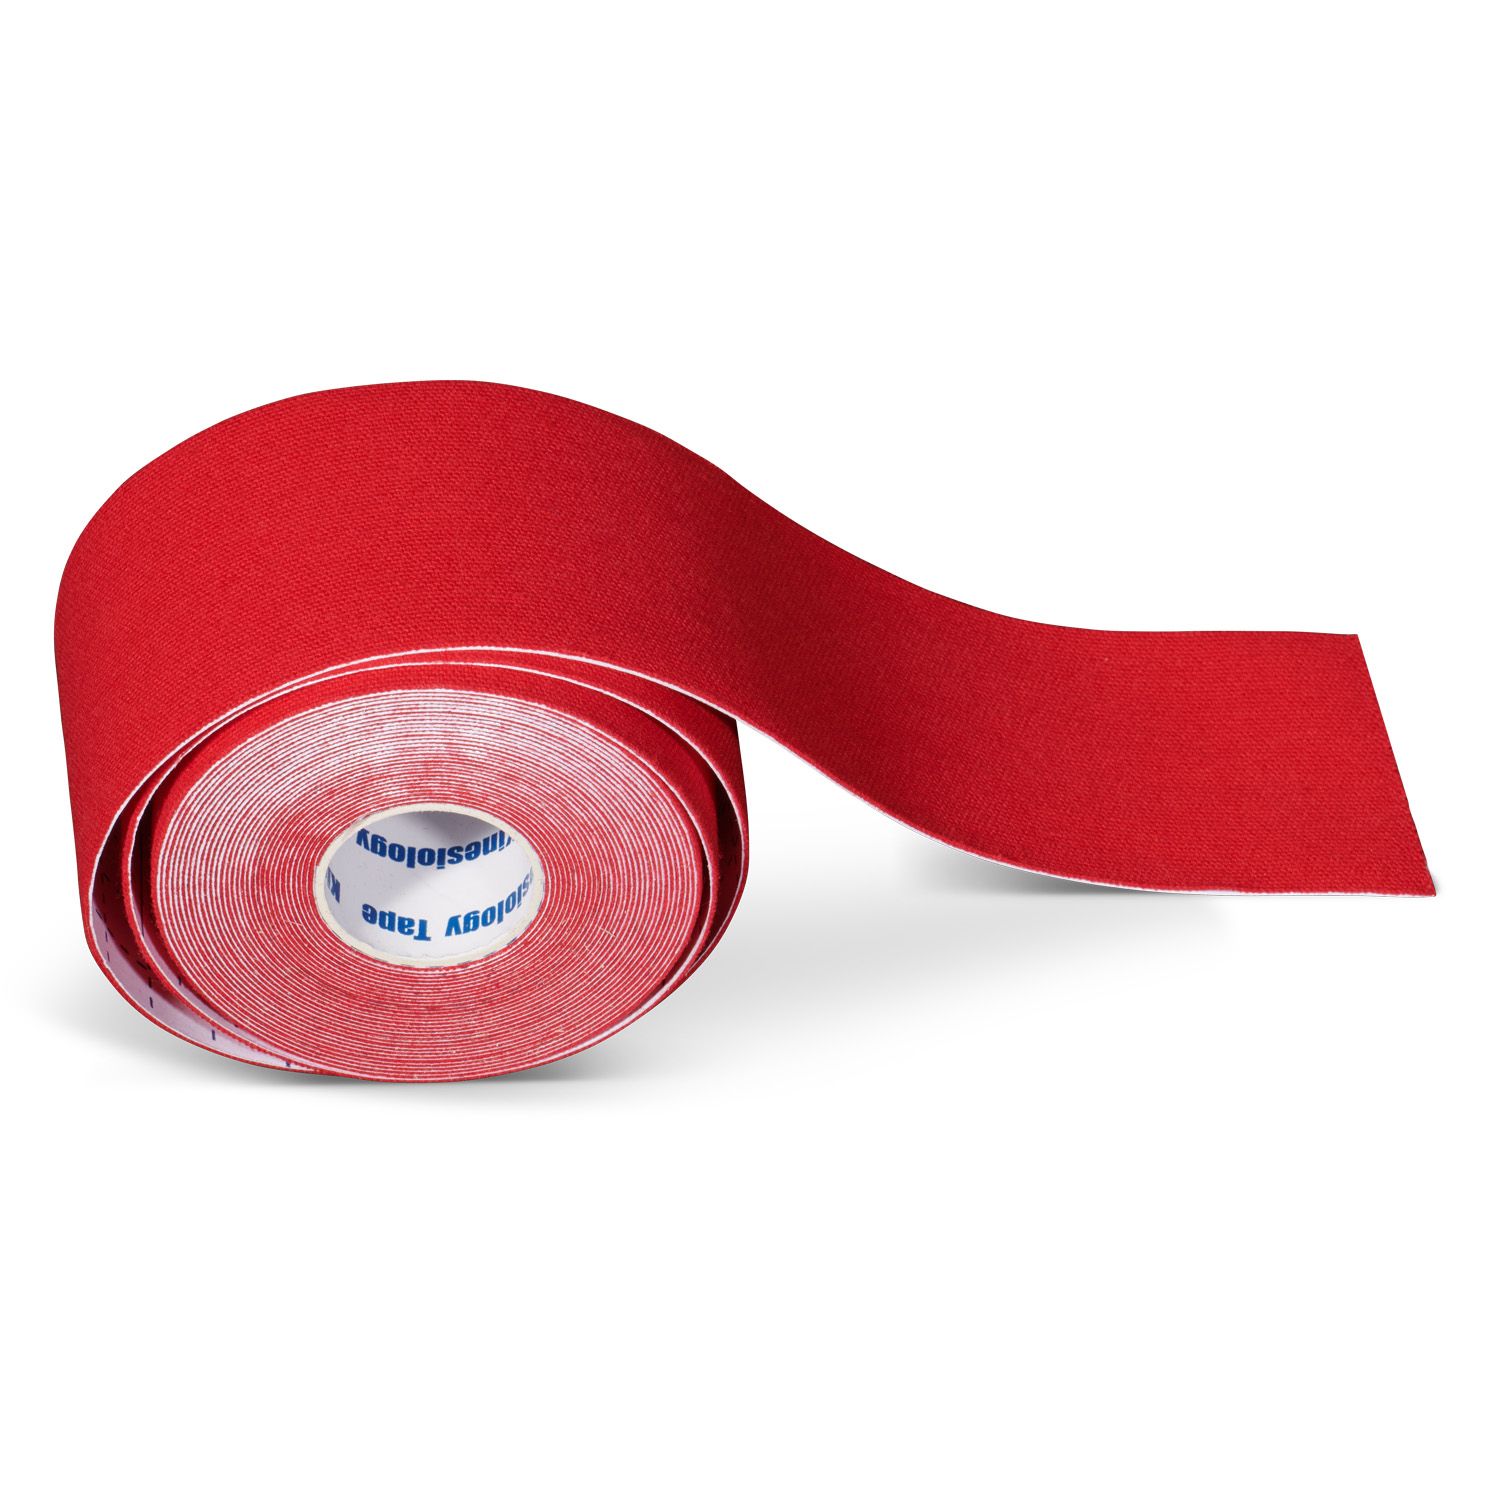 Kinesiology tape 6 rolls plus 2 rolls for free red